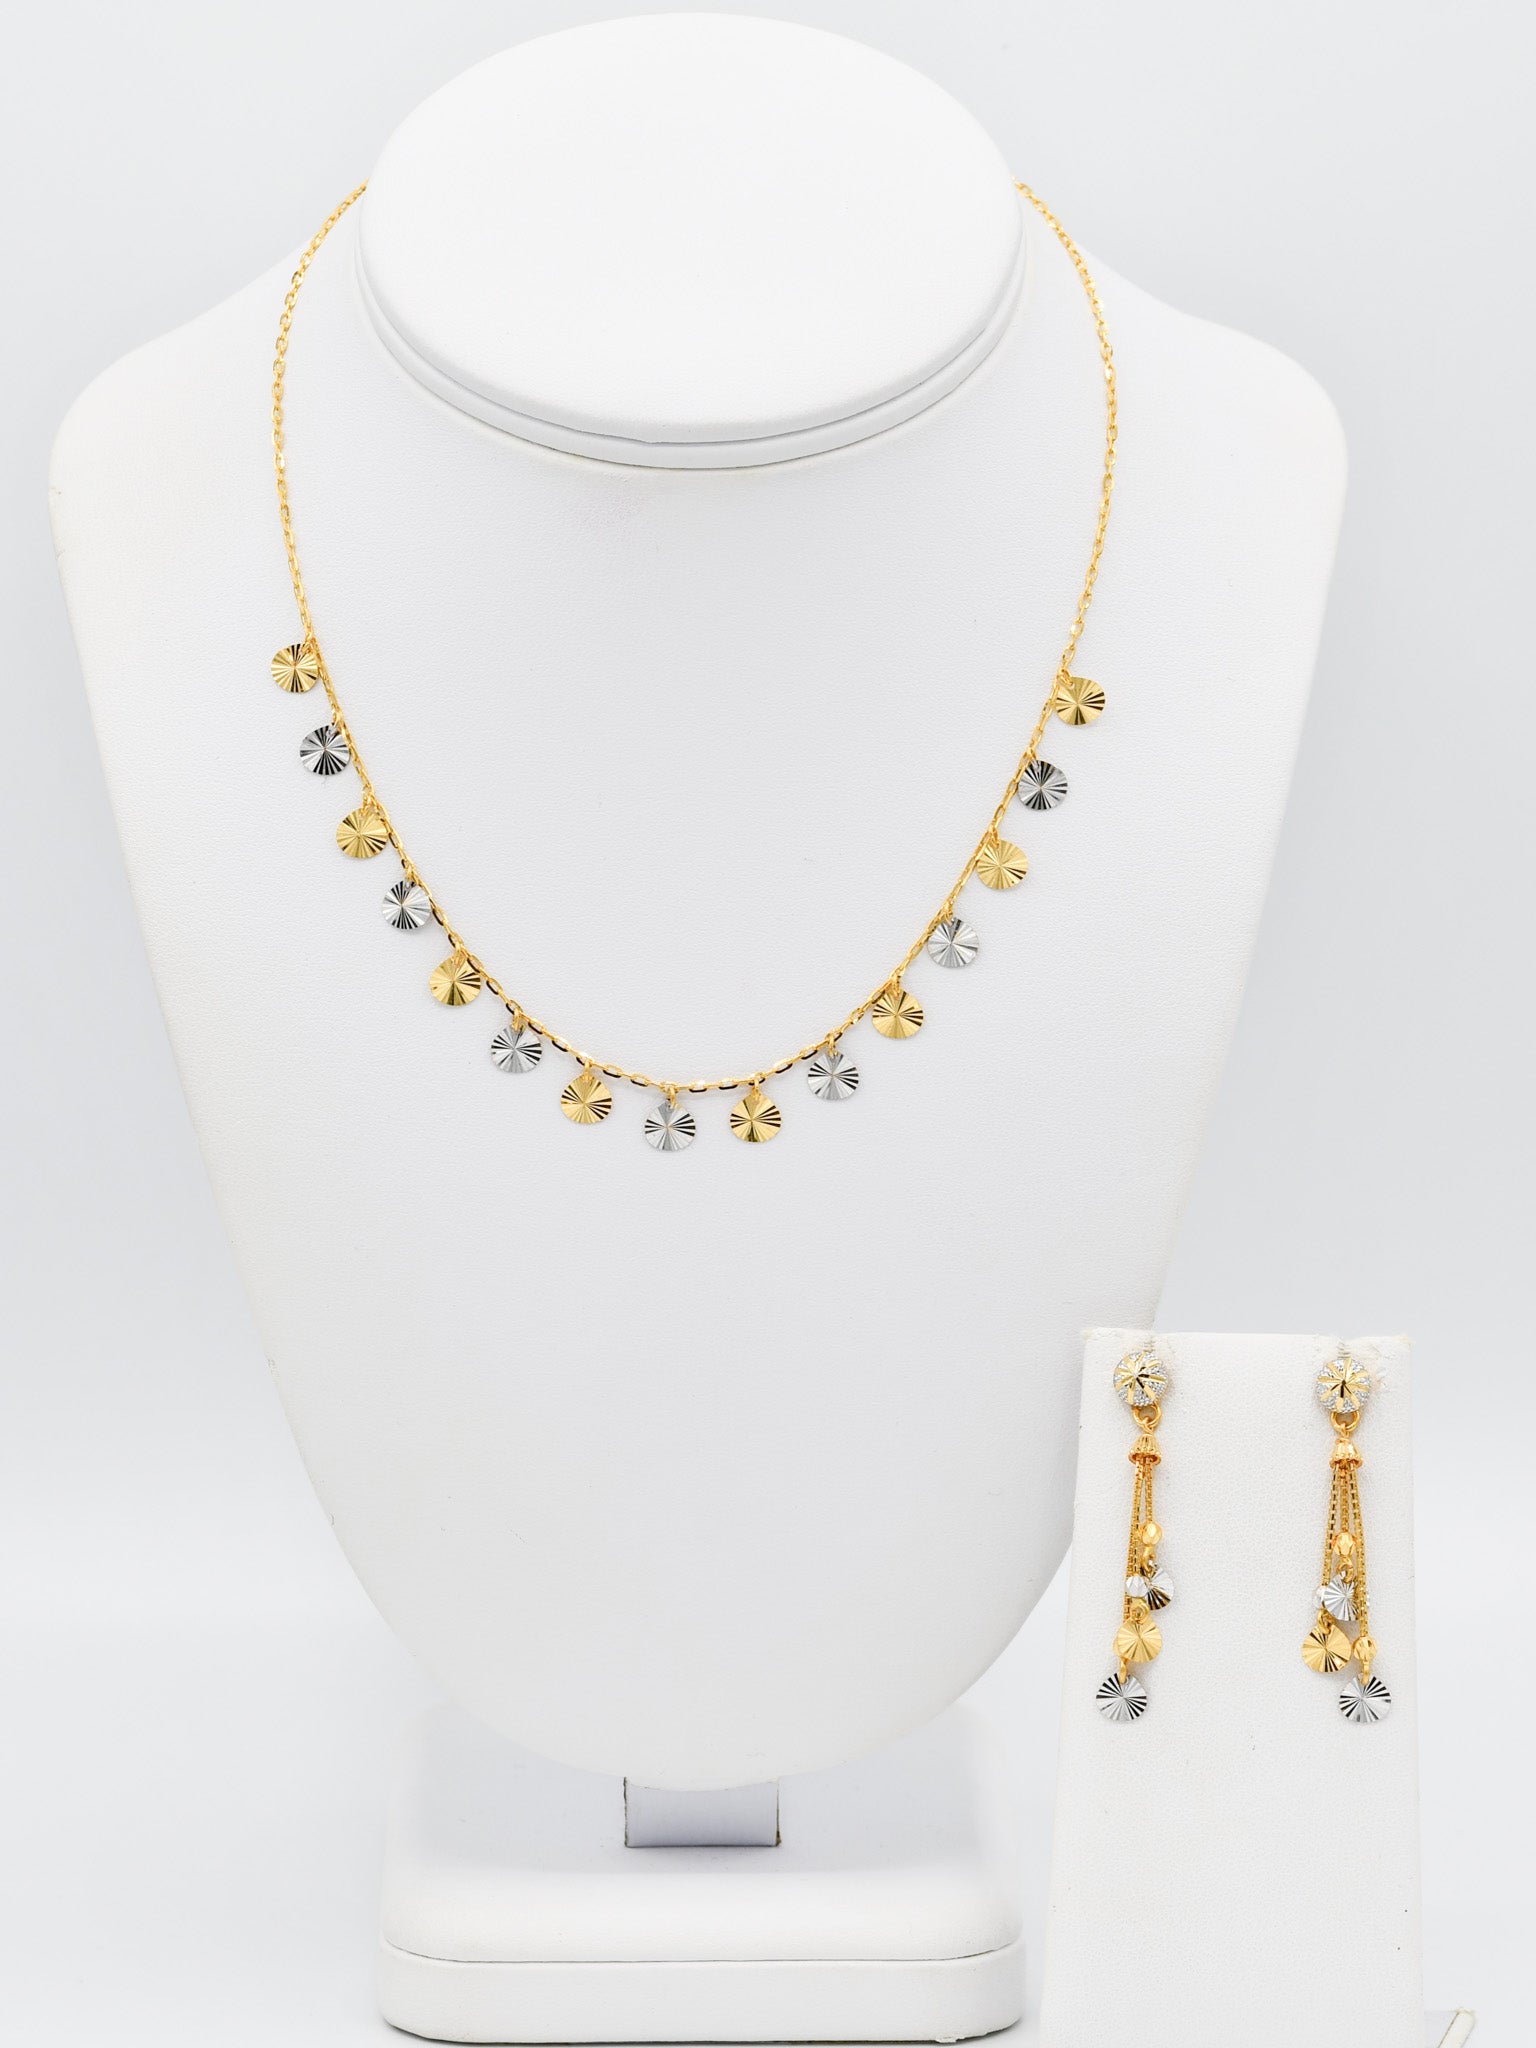 22ct Gold Two Tone Charms Necklace Set - Roop Darshan